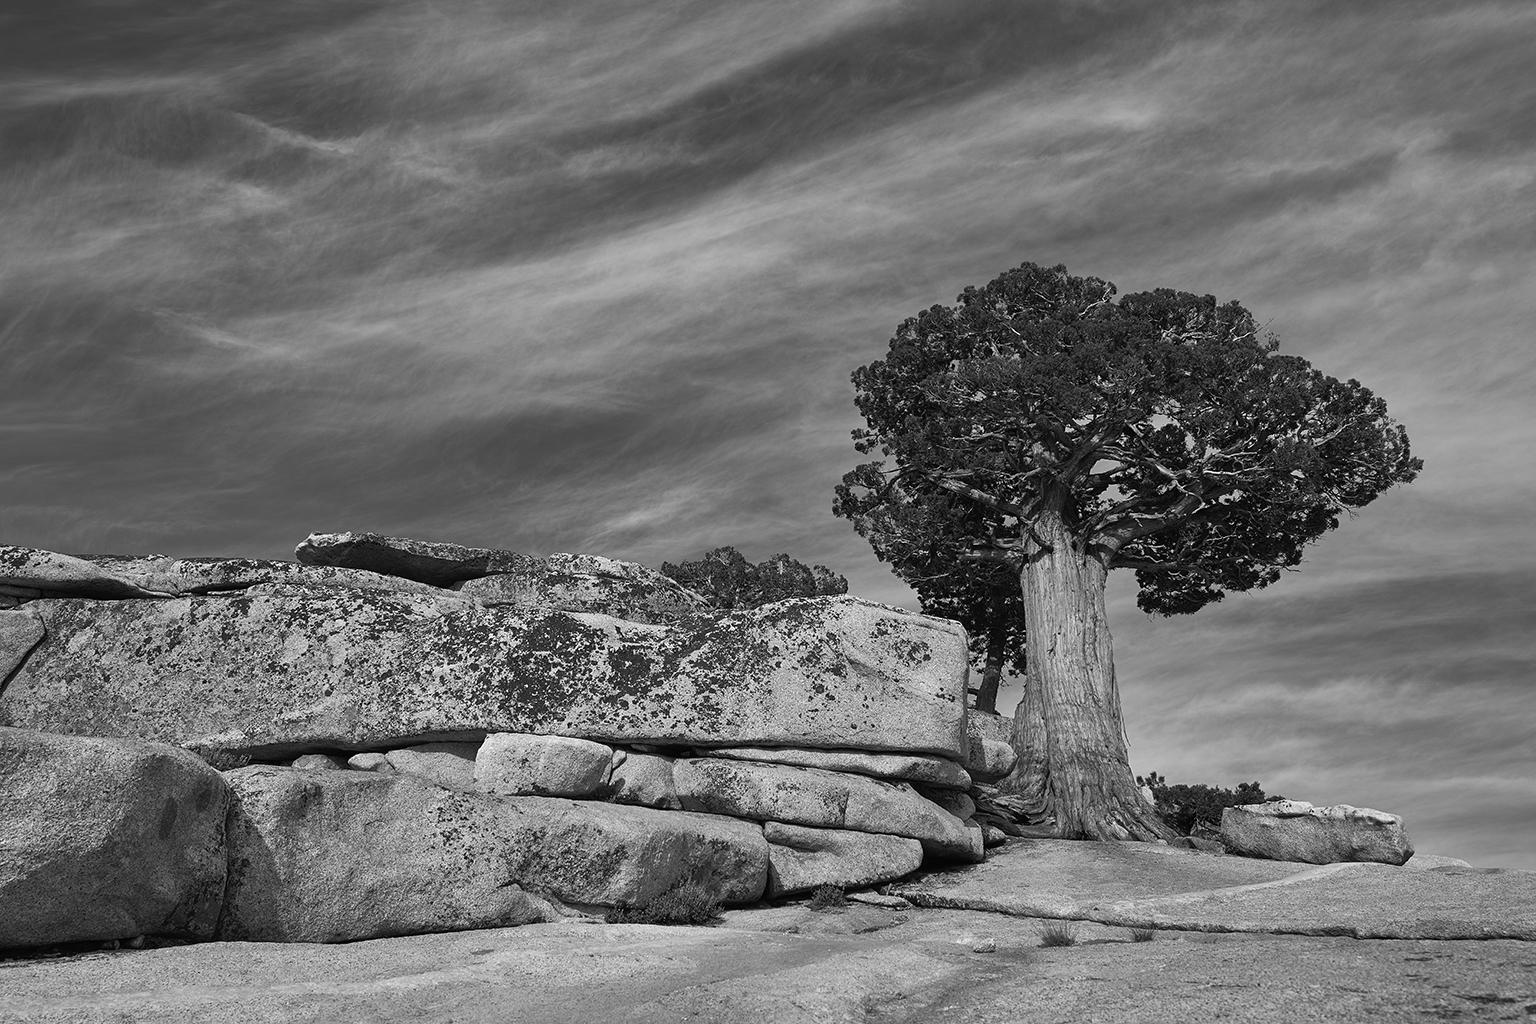 Frank Schott Black and White Photograph - Tree Study IV - large format b/w photograph of lone ancient tree in landscape